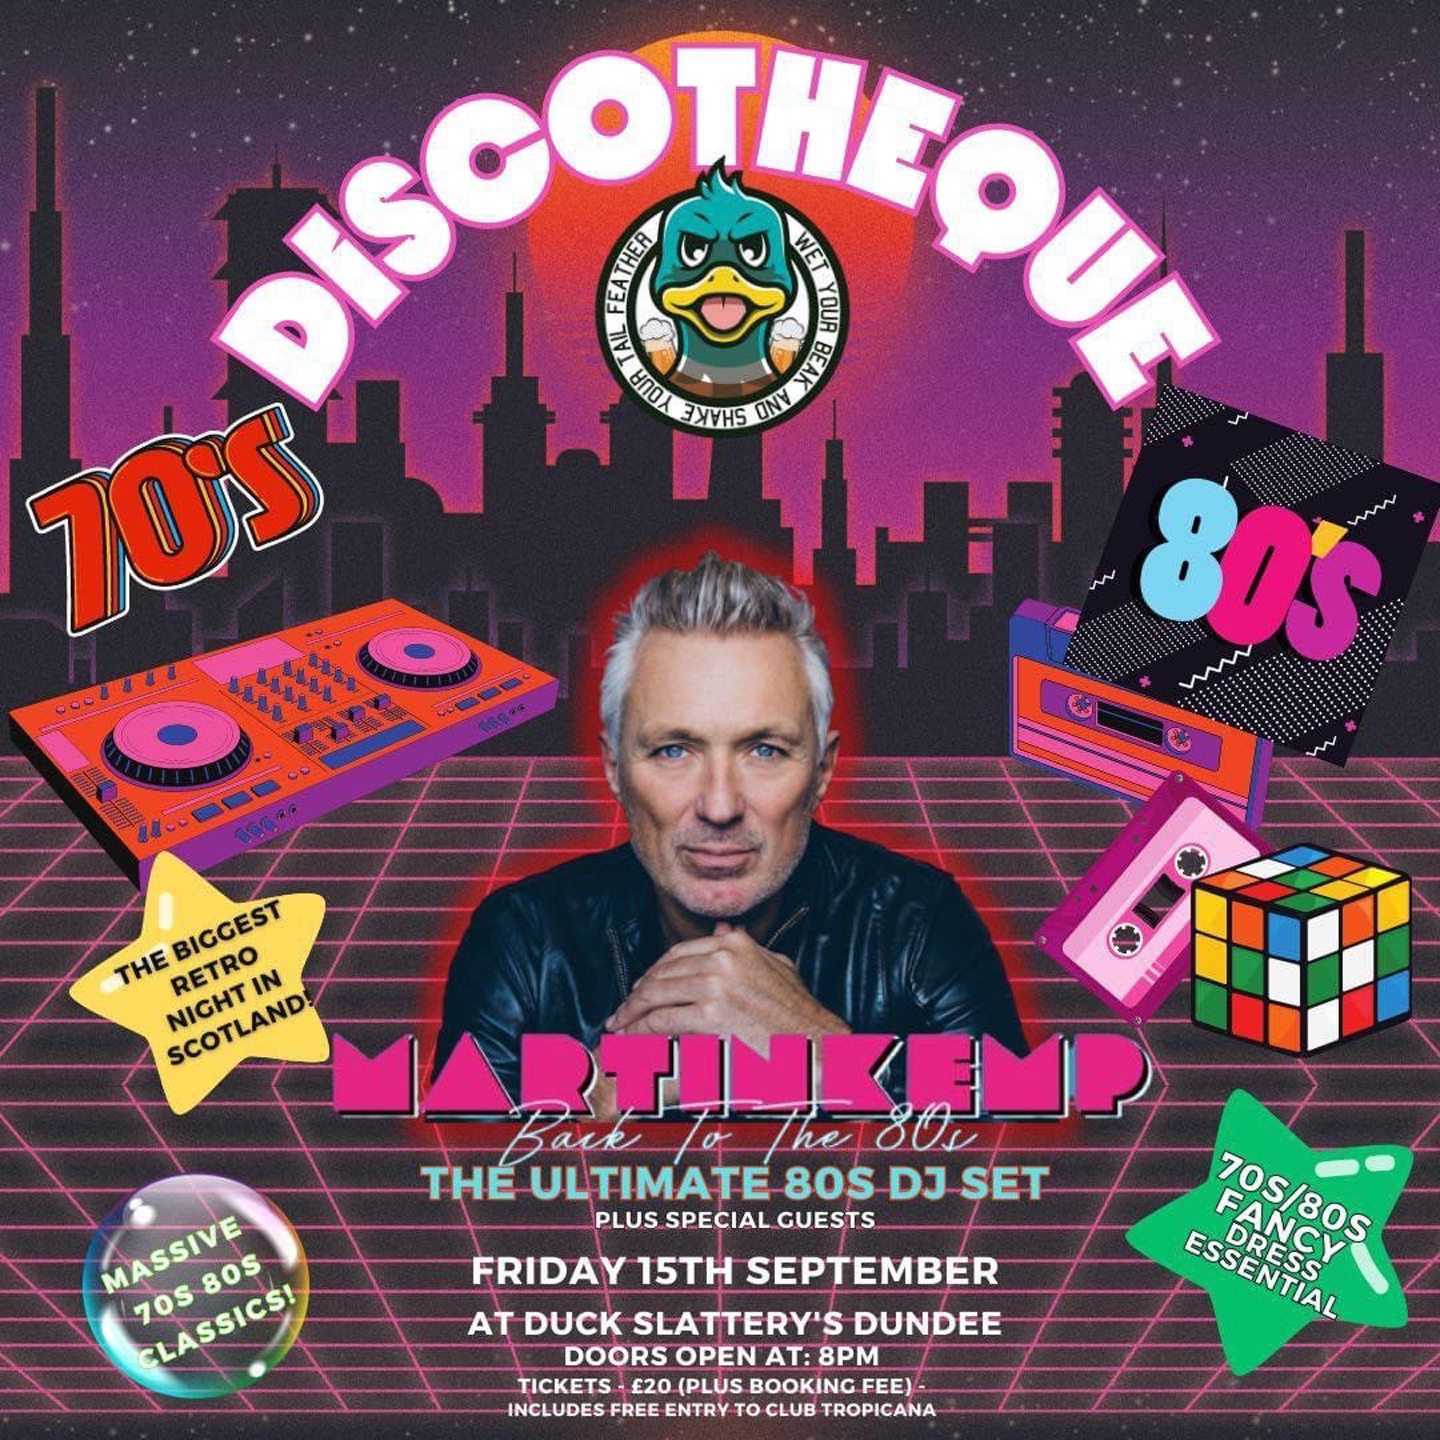 Martin Kemp is making a date with Dundee and will play the 1980s classics at Duck Slattery's, as this flyer shows. Image: Supplied.